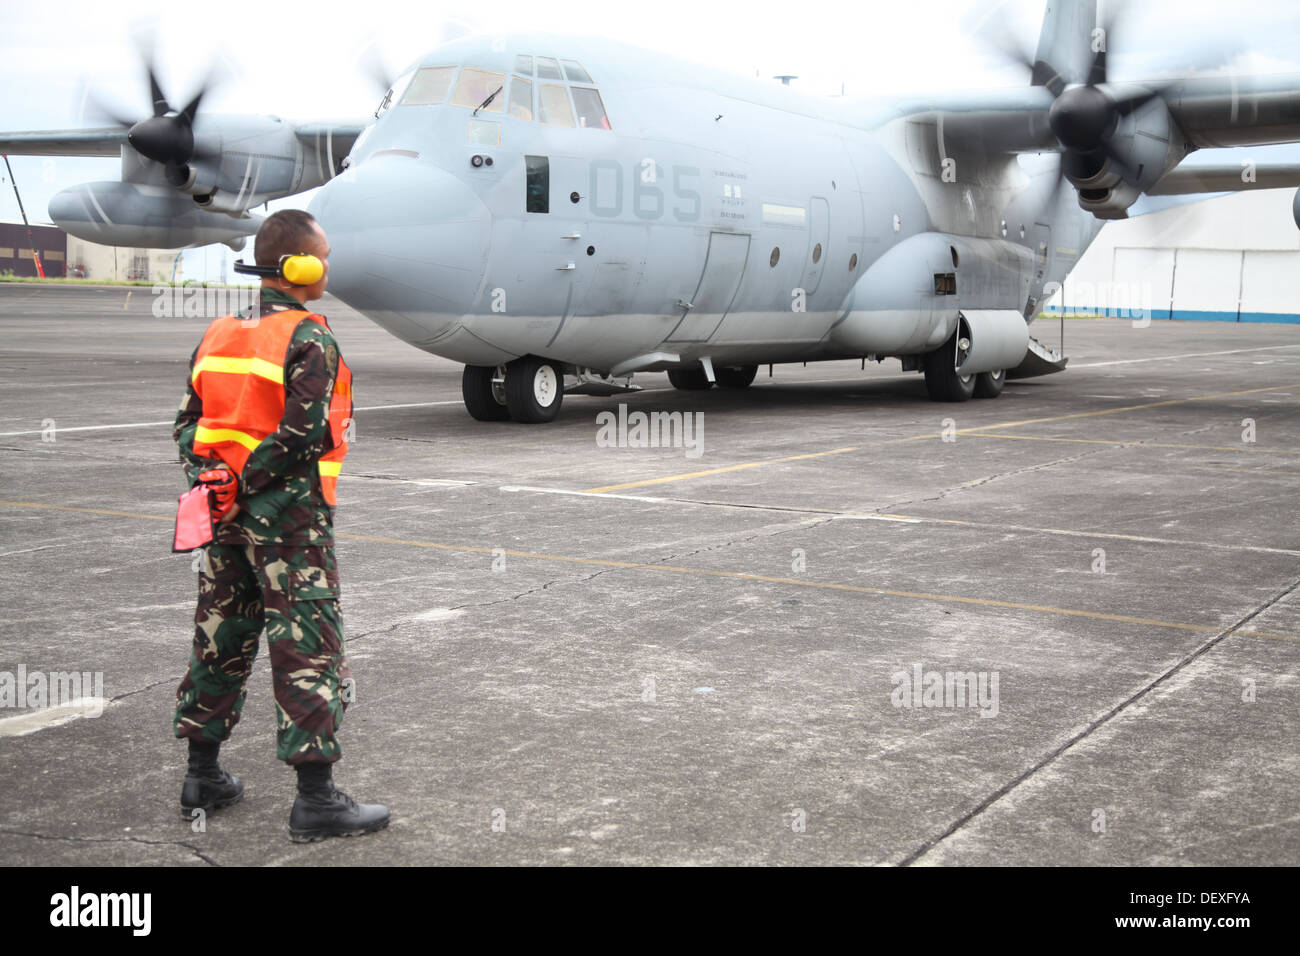 Philippine Air Force Tech. Sgt. Seno Nellas waits as a KC-130 Hercules aircraft arrives Sept. 14 carrying Marines for Amphibious Landing Exercise 2014 at Clark Air Field, Pampanga, Republic of the Philippines. Nellas is the noncommissioned officer in char Stock Photo